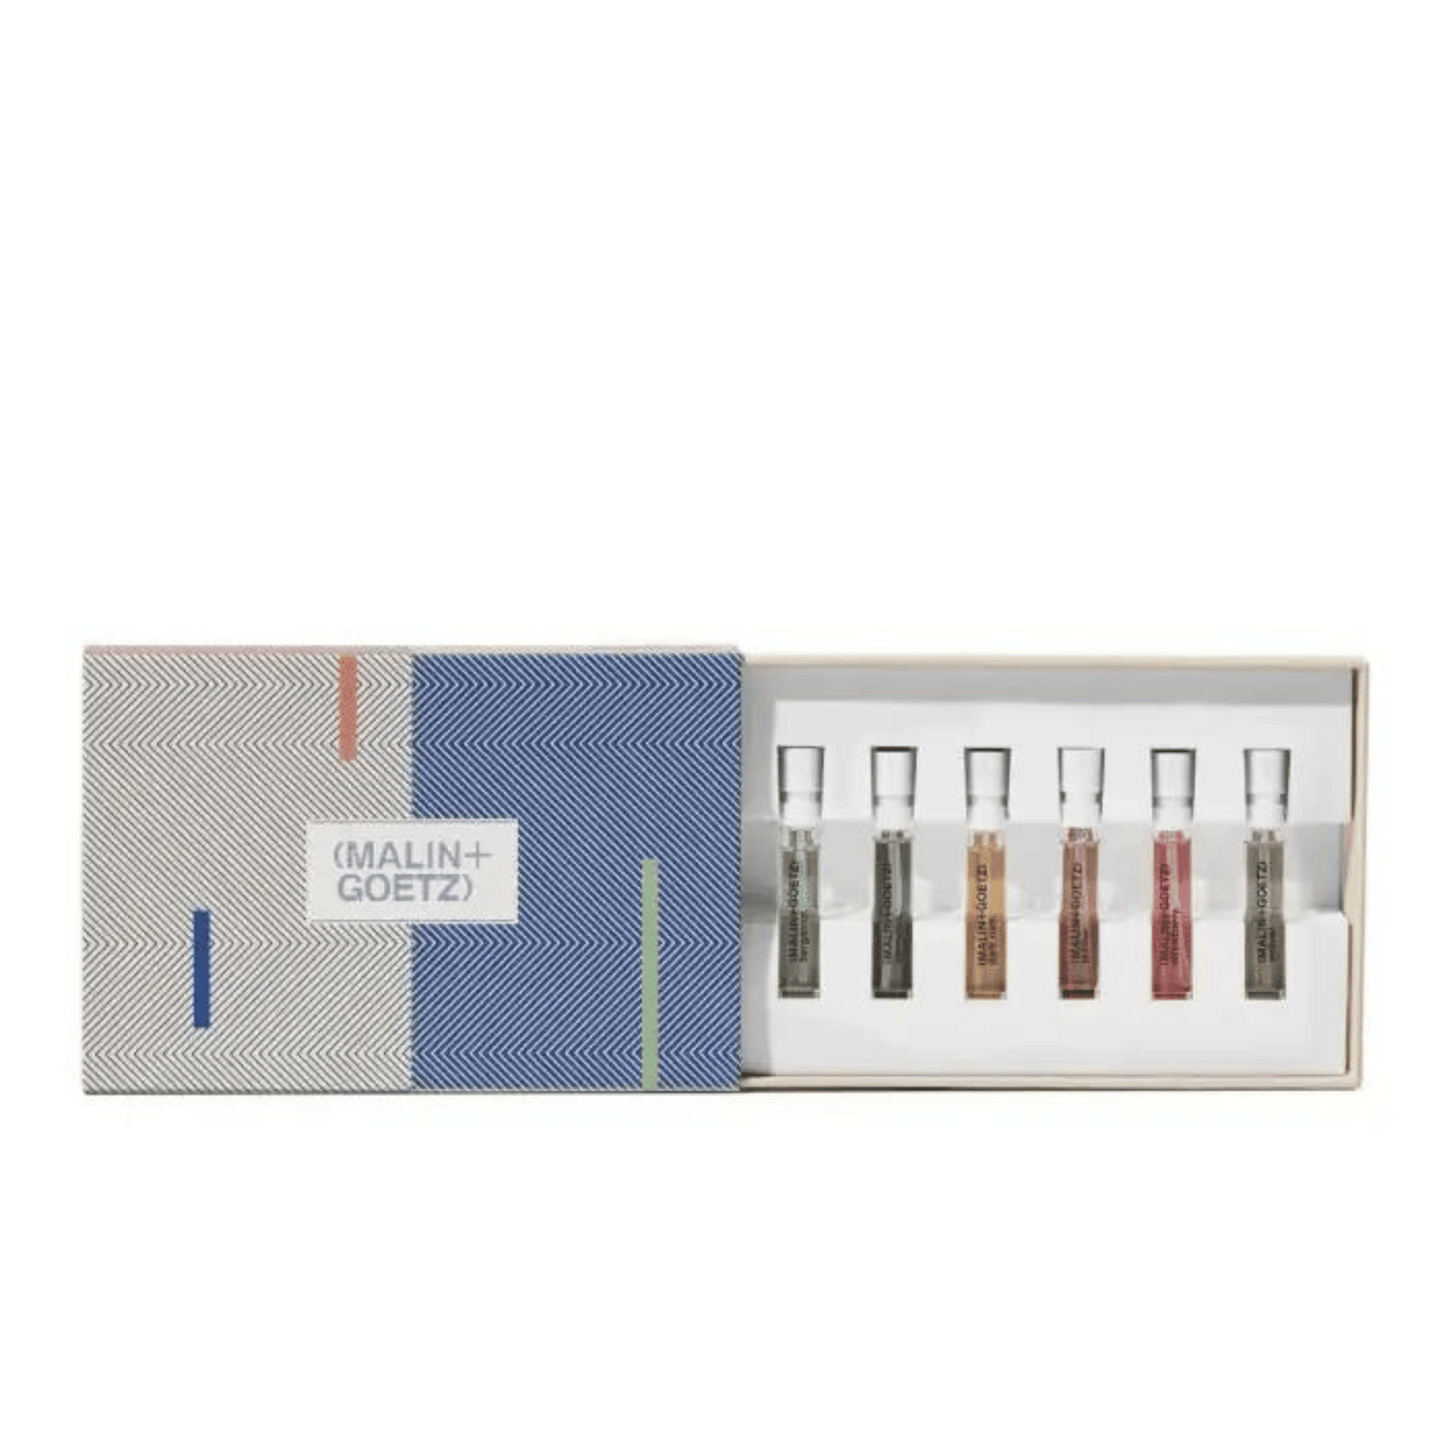 Primary Image of Holiday Fragrance Discovery Set